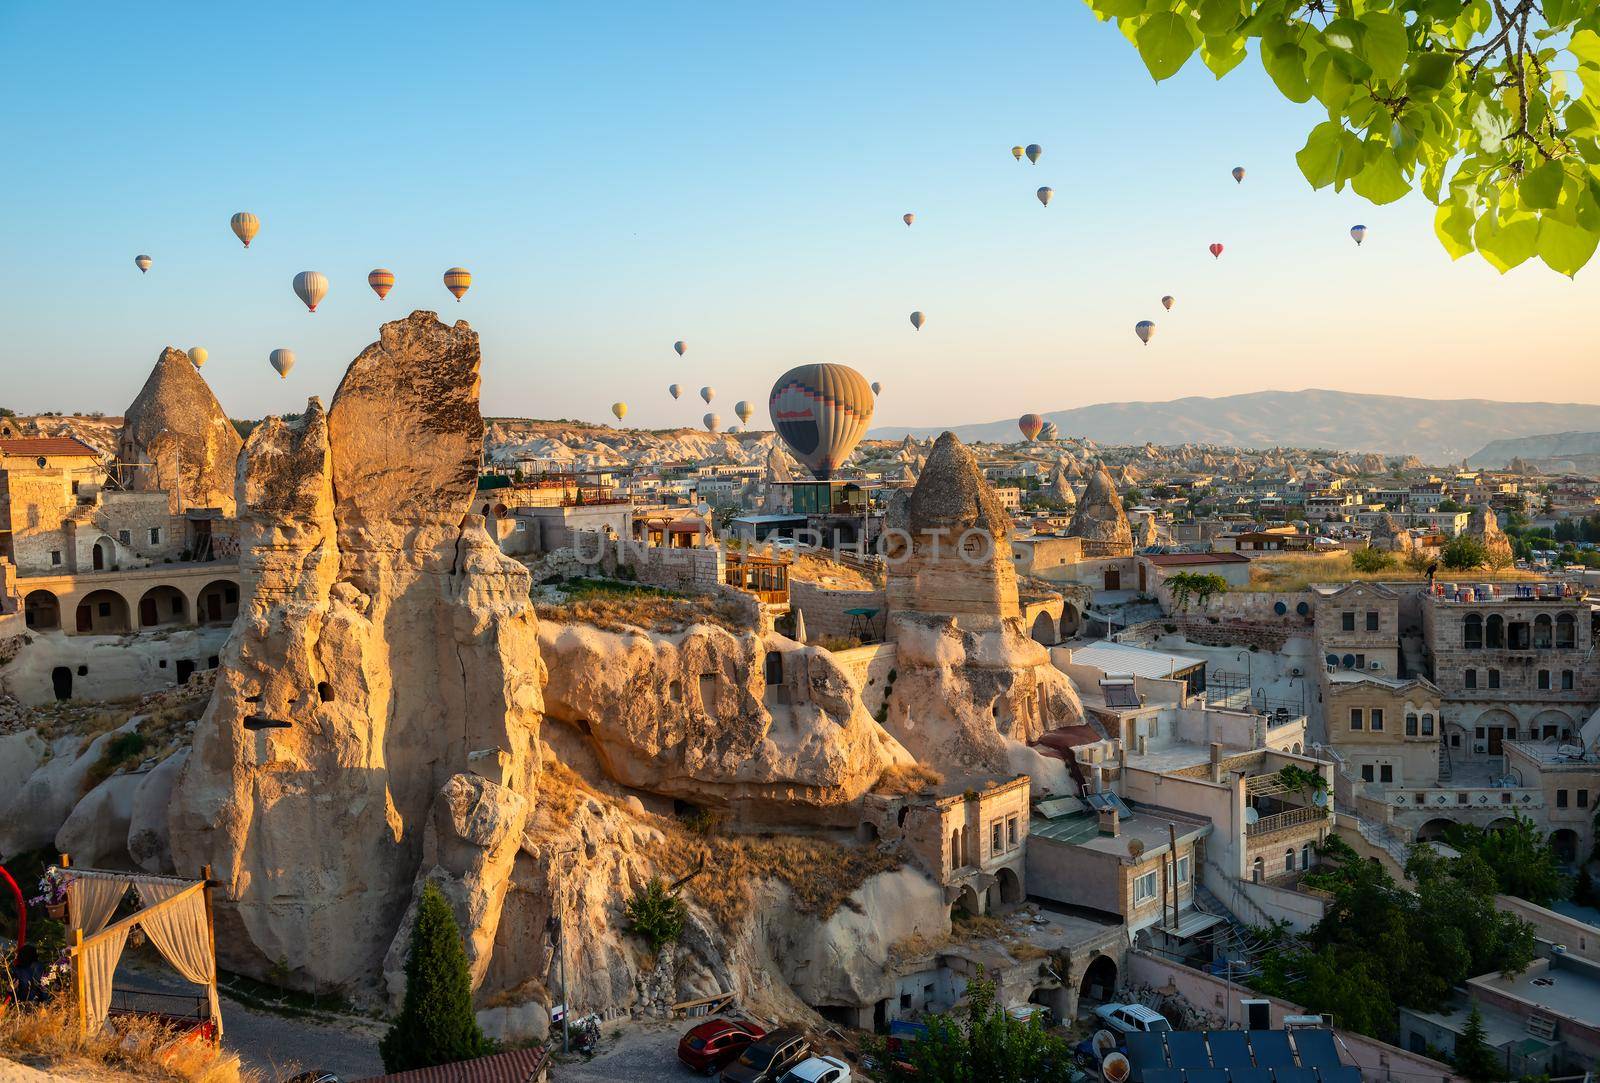 Hot air balloons over rocks by Givaga